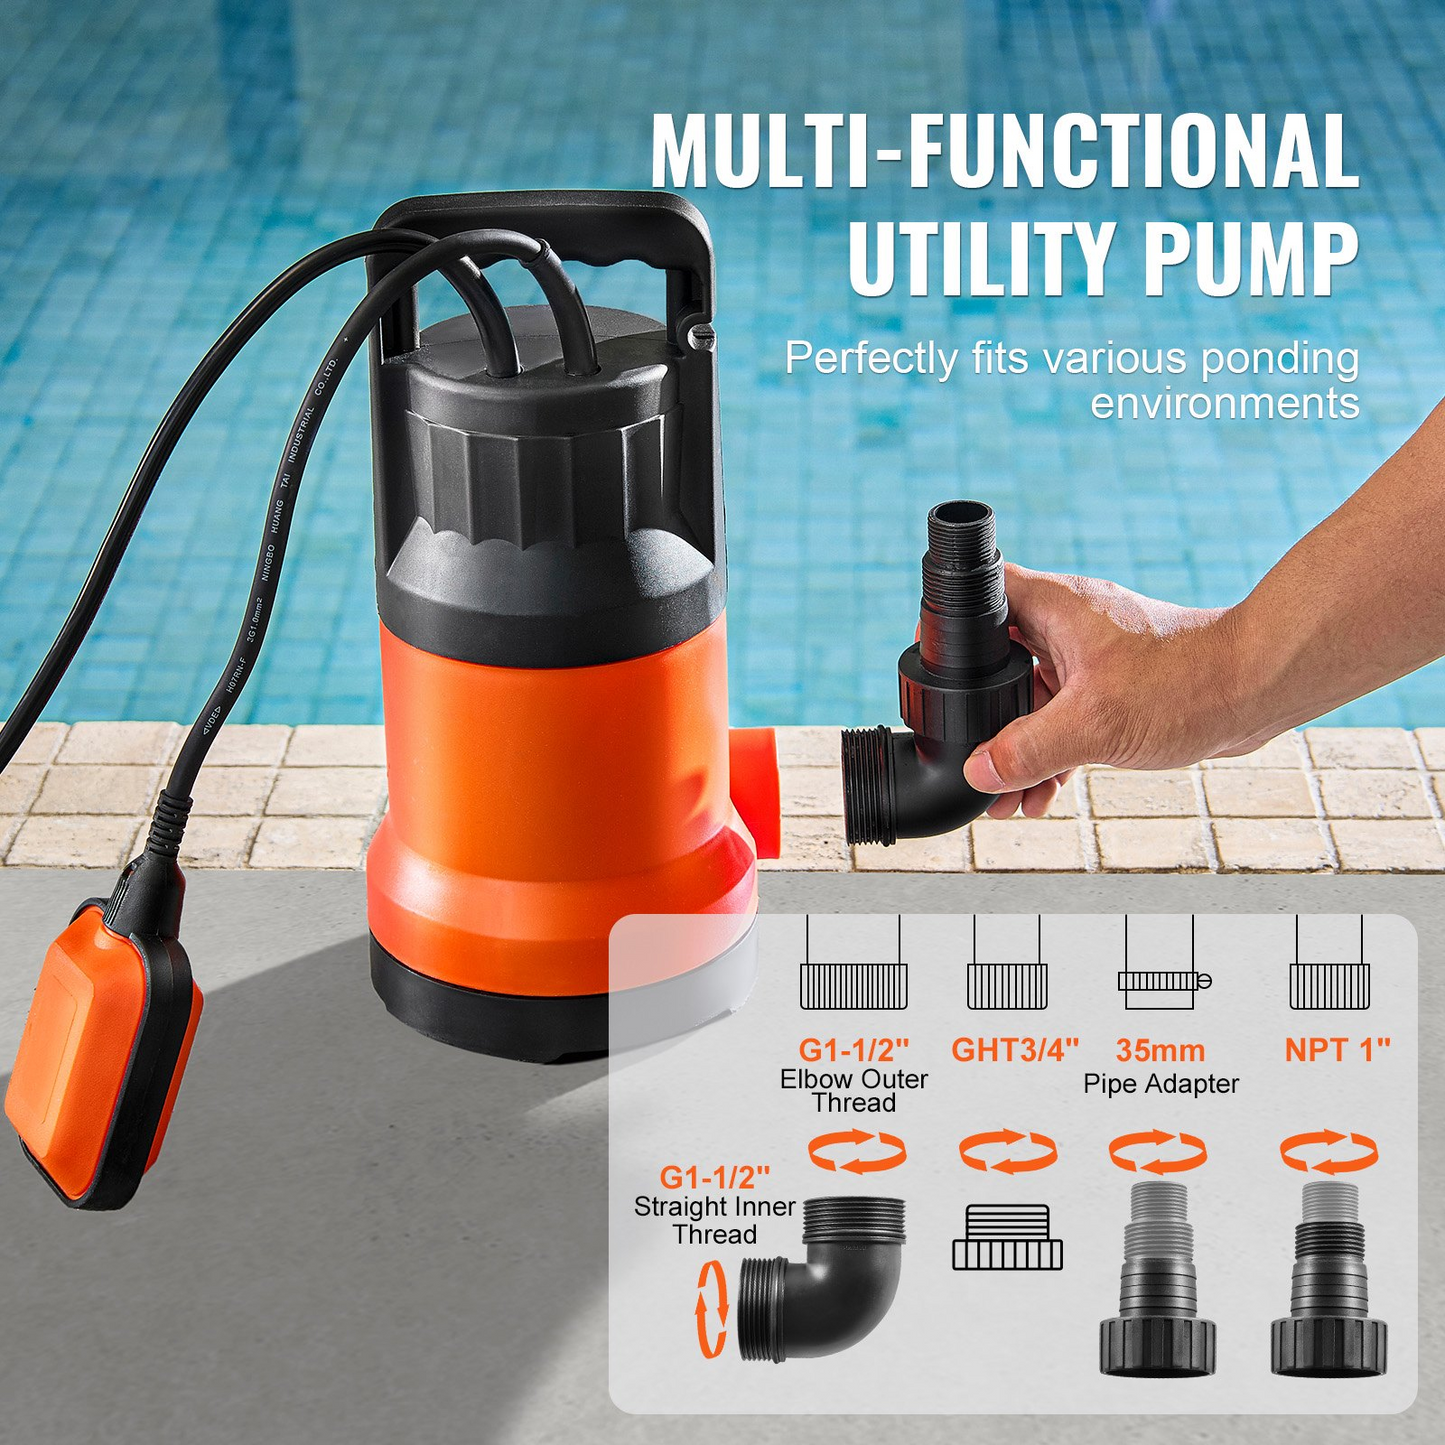 VEVOR Utility Pump, 1 HP, 4000 GPH High Flow, 31 ft Head, Sump Pump Submersible Water Pump Portable Utility Pump with 10 ft Long Power Cord for Draining Water from Swimming Pool Garden Pond Basement, Goodies N Stuff